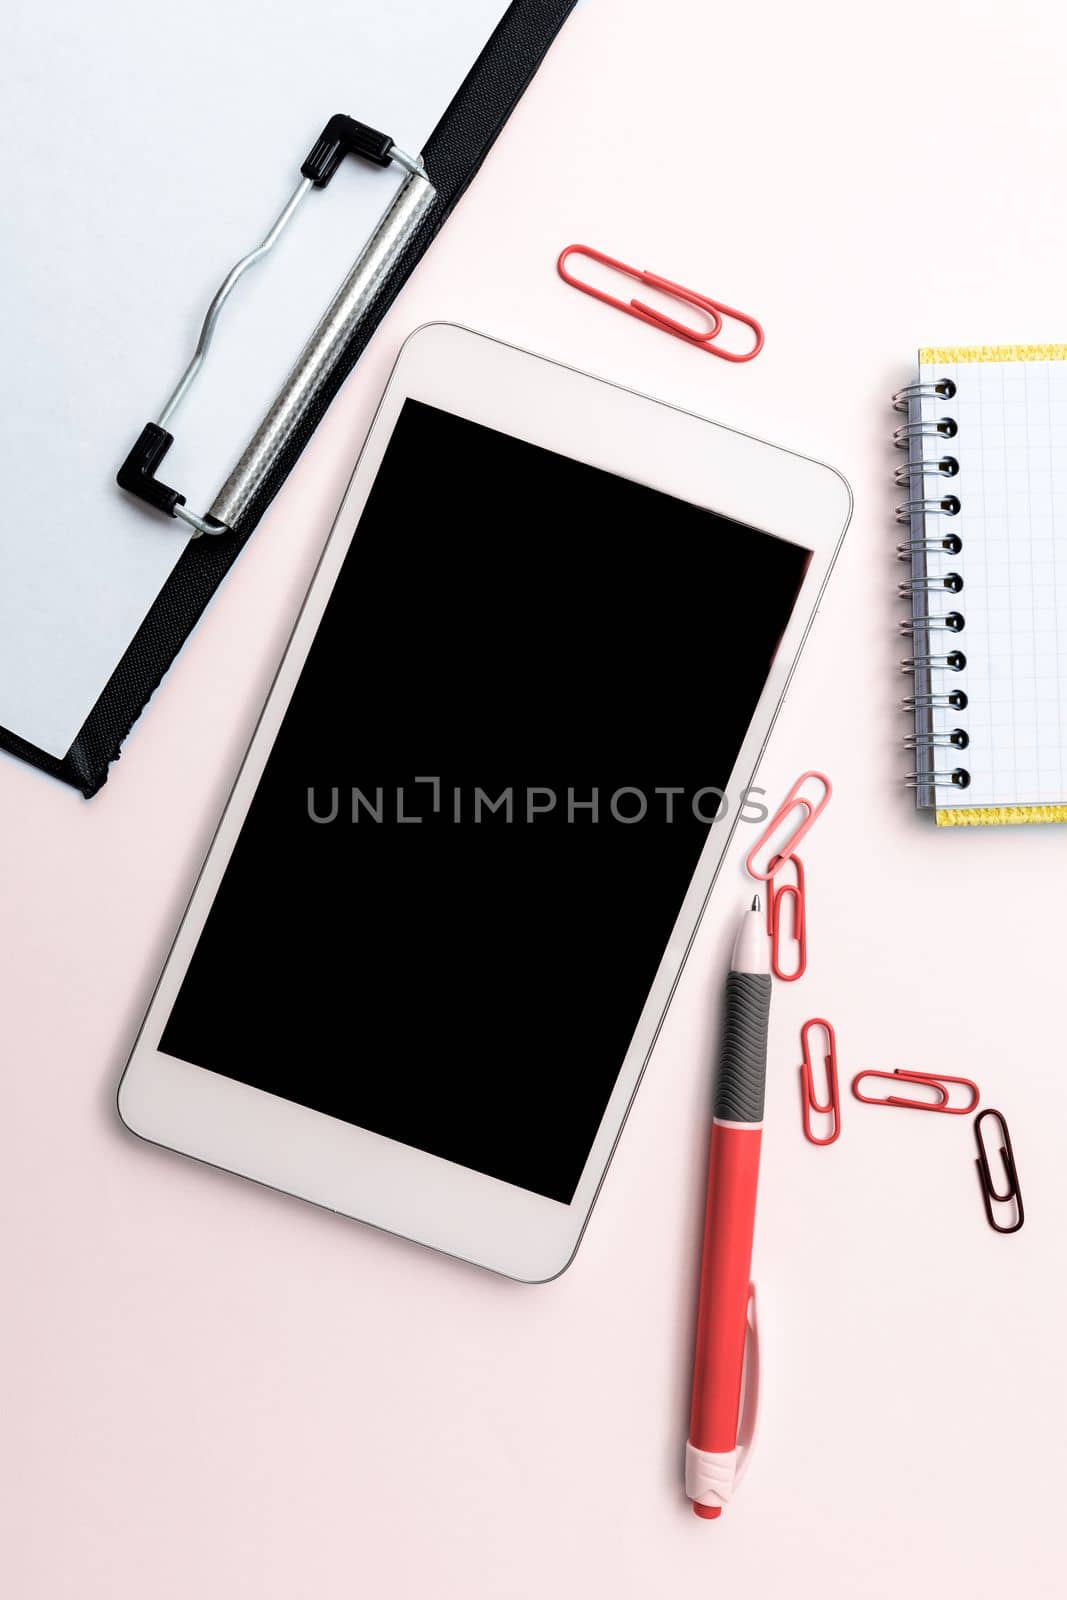 Phone Screen With Important Message On Desk With pens, Calculator And Notebook. Cellphone With Crutial Information On Table With Cup. Late Updates Presented. by nialowwa